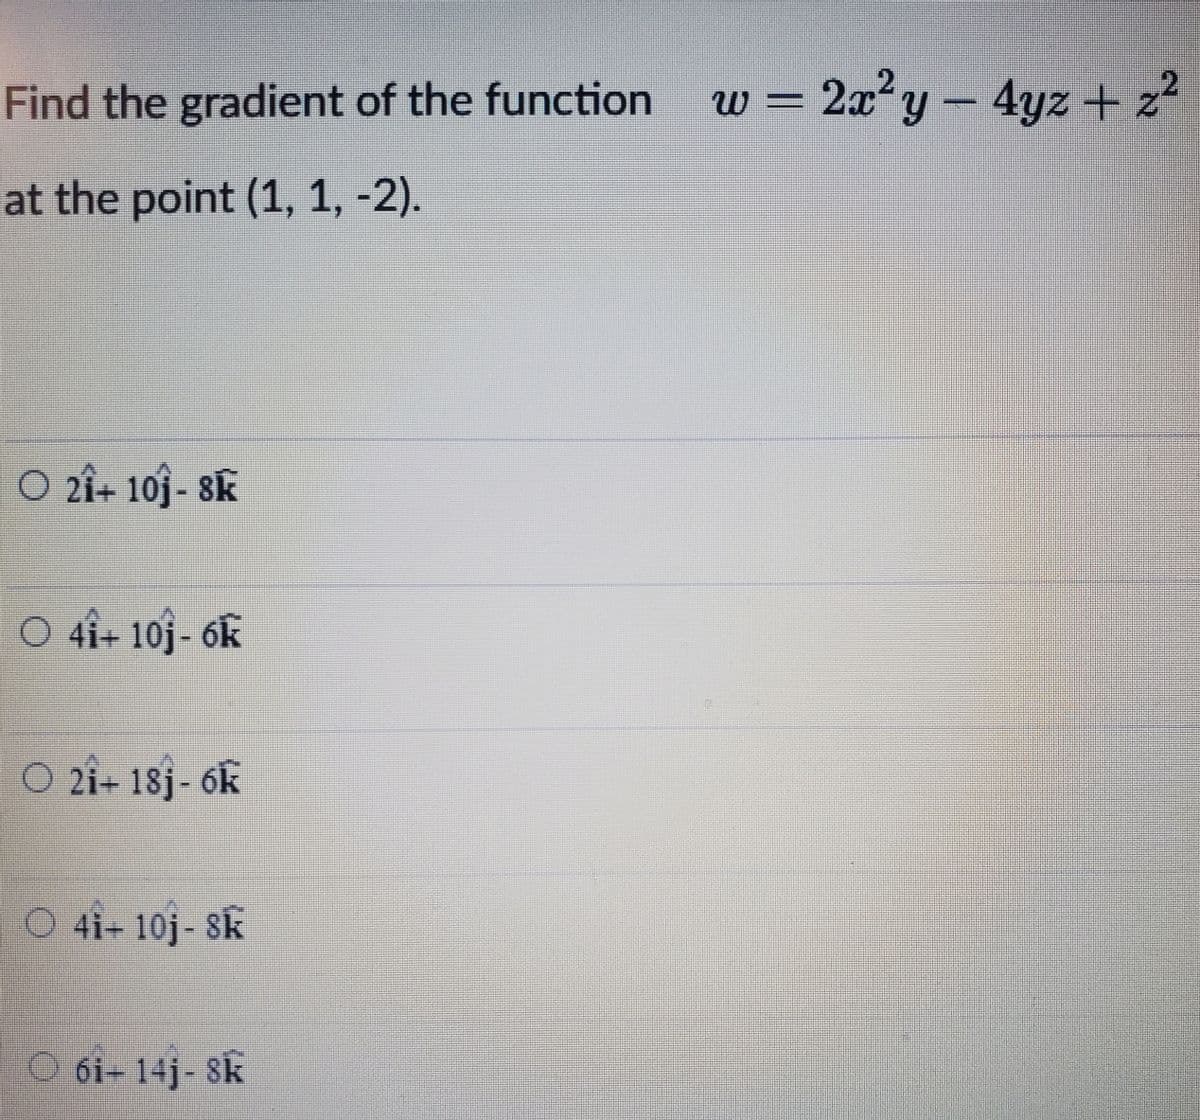 Find the gradient of the function w = 2x²y – 4yz + z?
at the point (1, 1, -2).
O 2i+ 10j - 8k
O 4i+ 10j- 6k
O 2i+ 18j- 6k
O 4i+ 10j- Sk
O 6i- 14j- 8k
